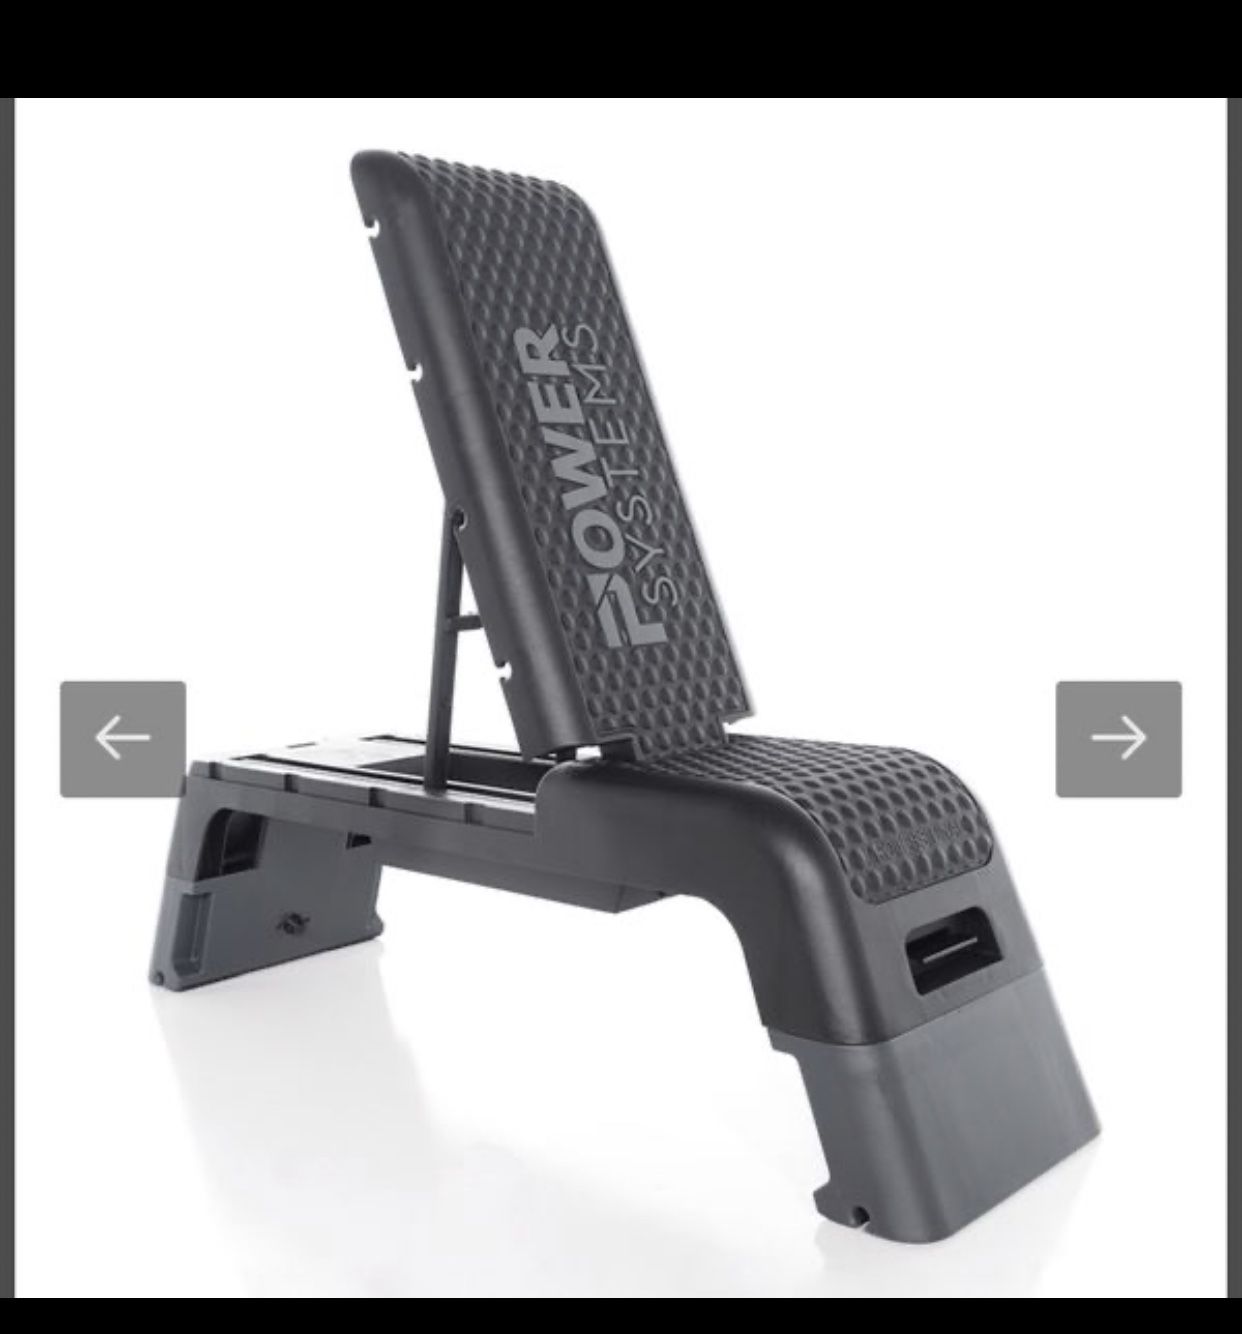 Multi purpose workout bench NEW. Work out at home!!